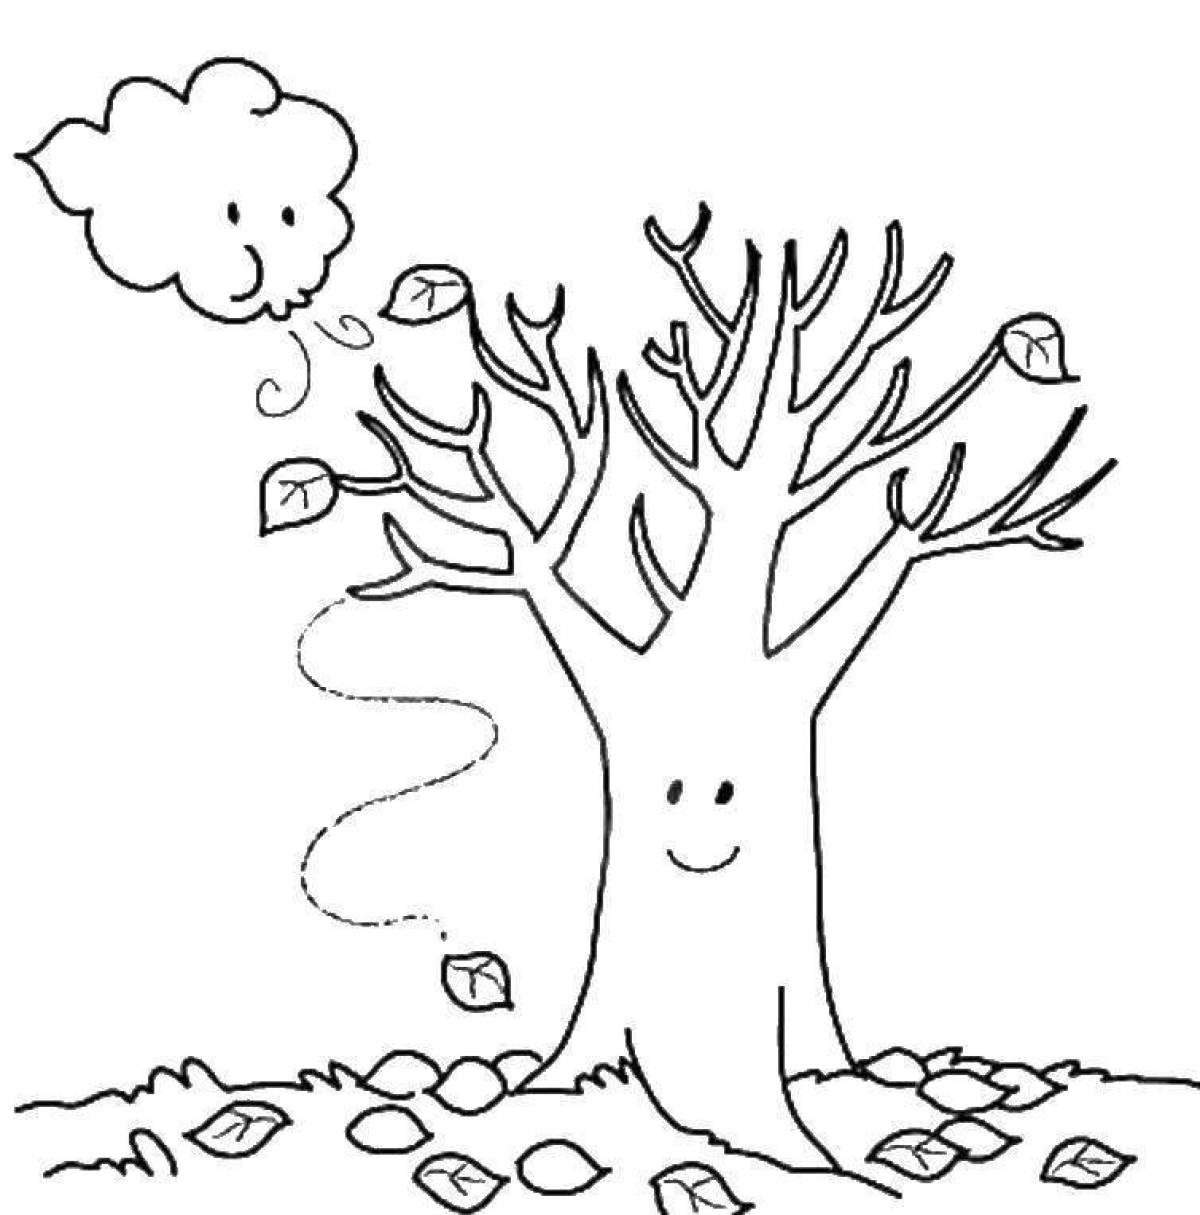 Coloring bright tree without leaves for children